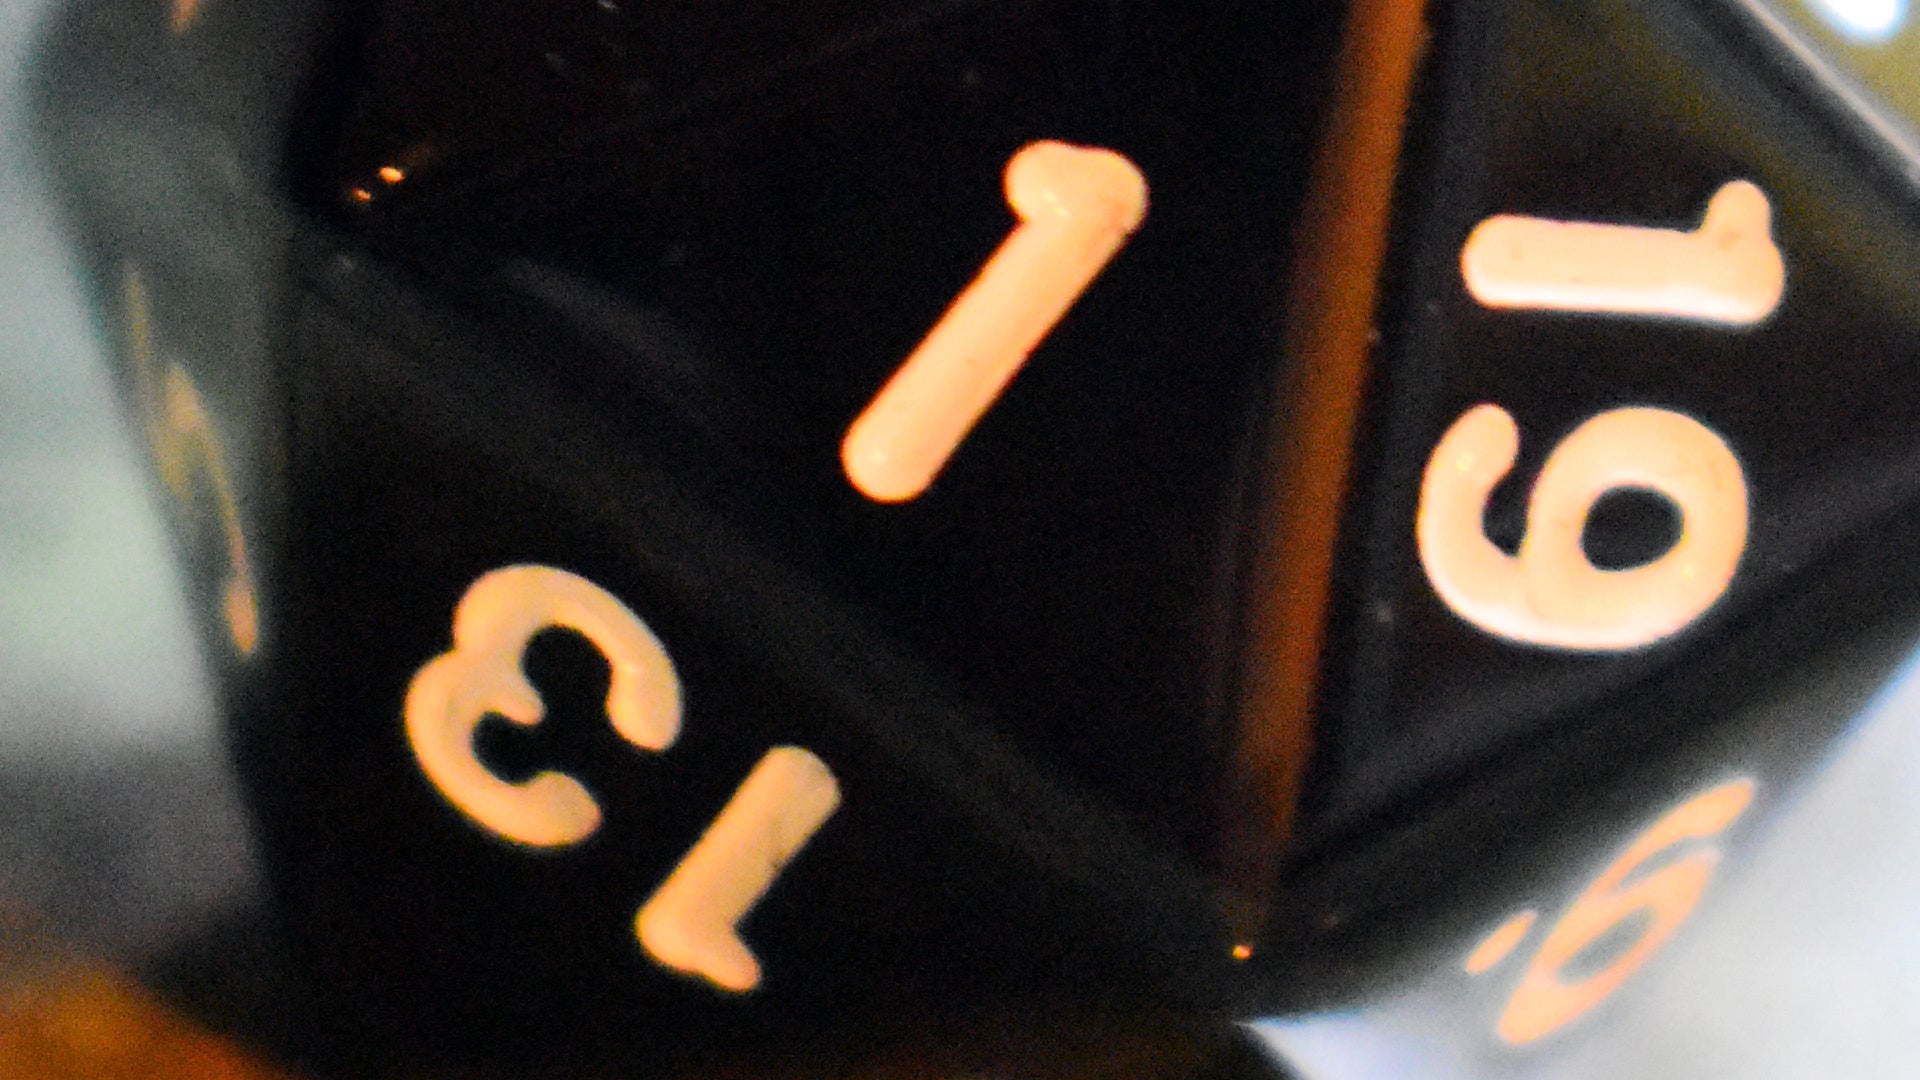 d20 20-sided die showing 1 result close-up